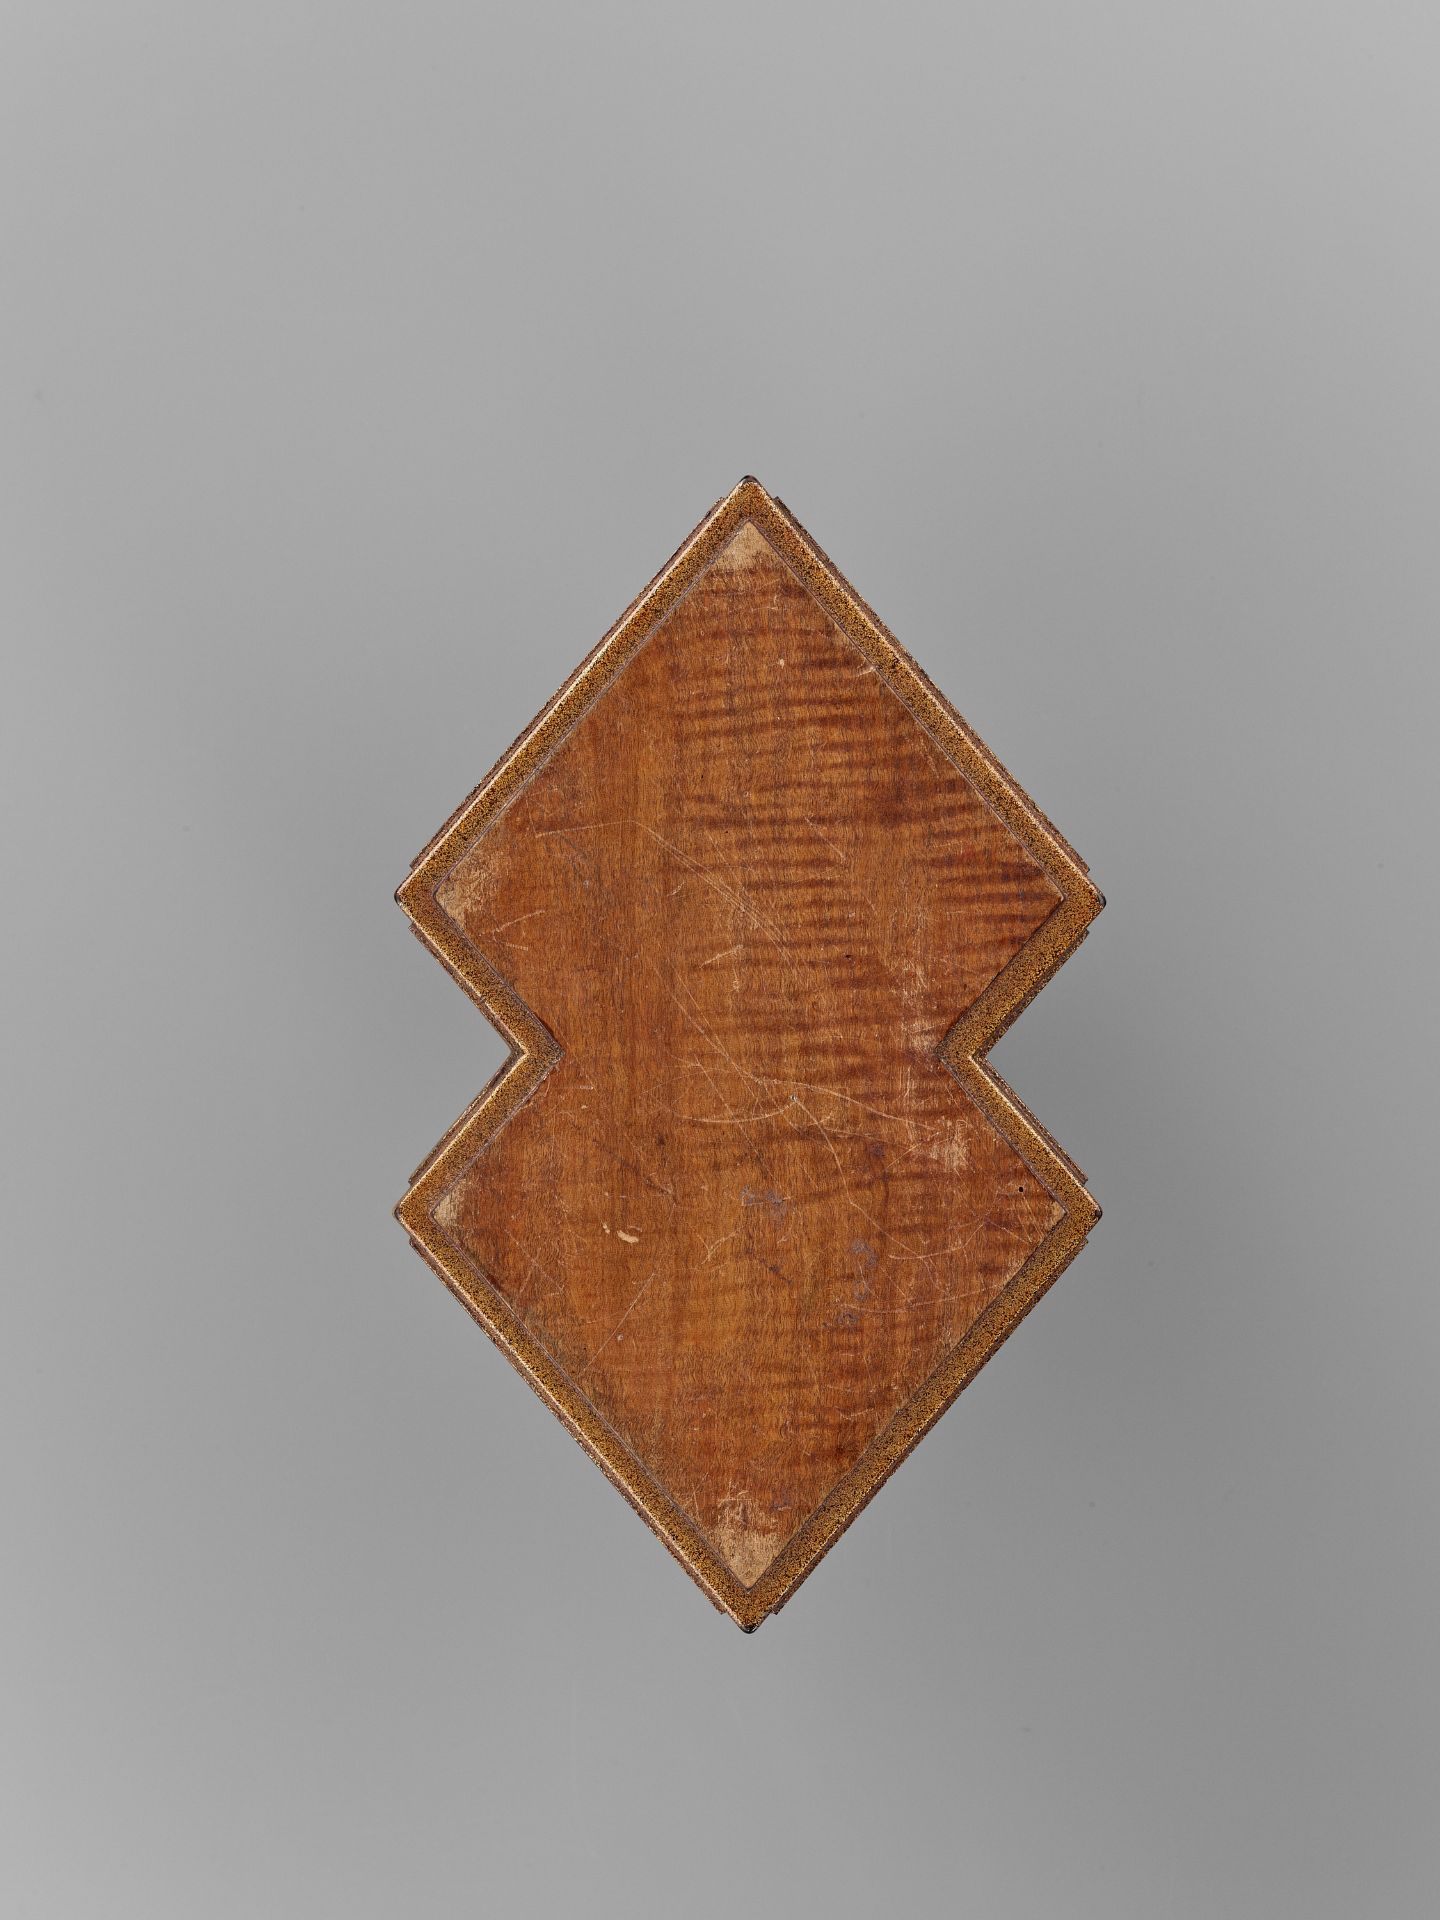 A DOUBLE-LOZENGE-FORM WOOD KOBAKO AND COVER - Image 13 of 15